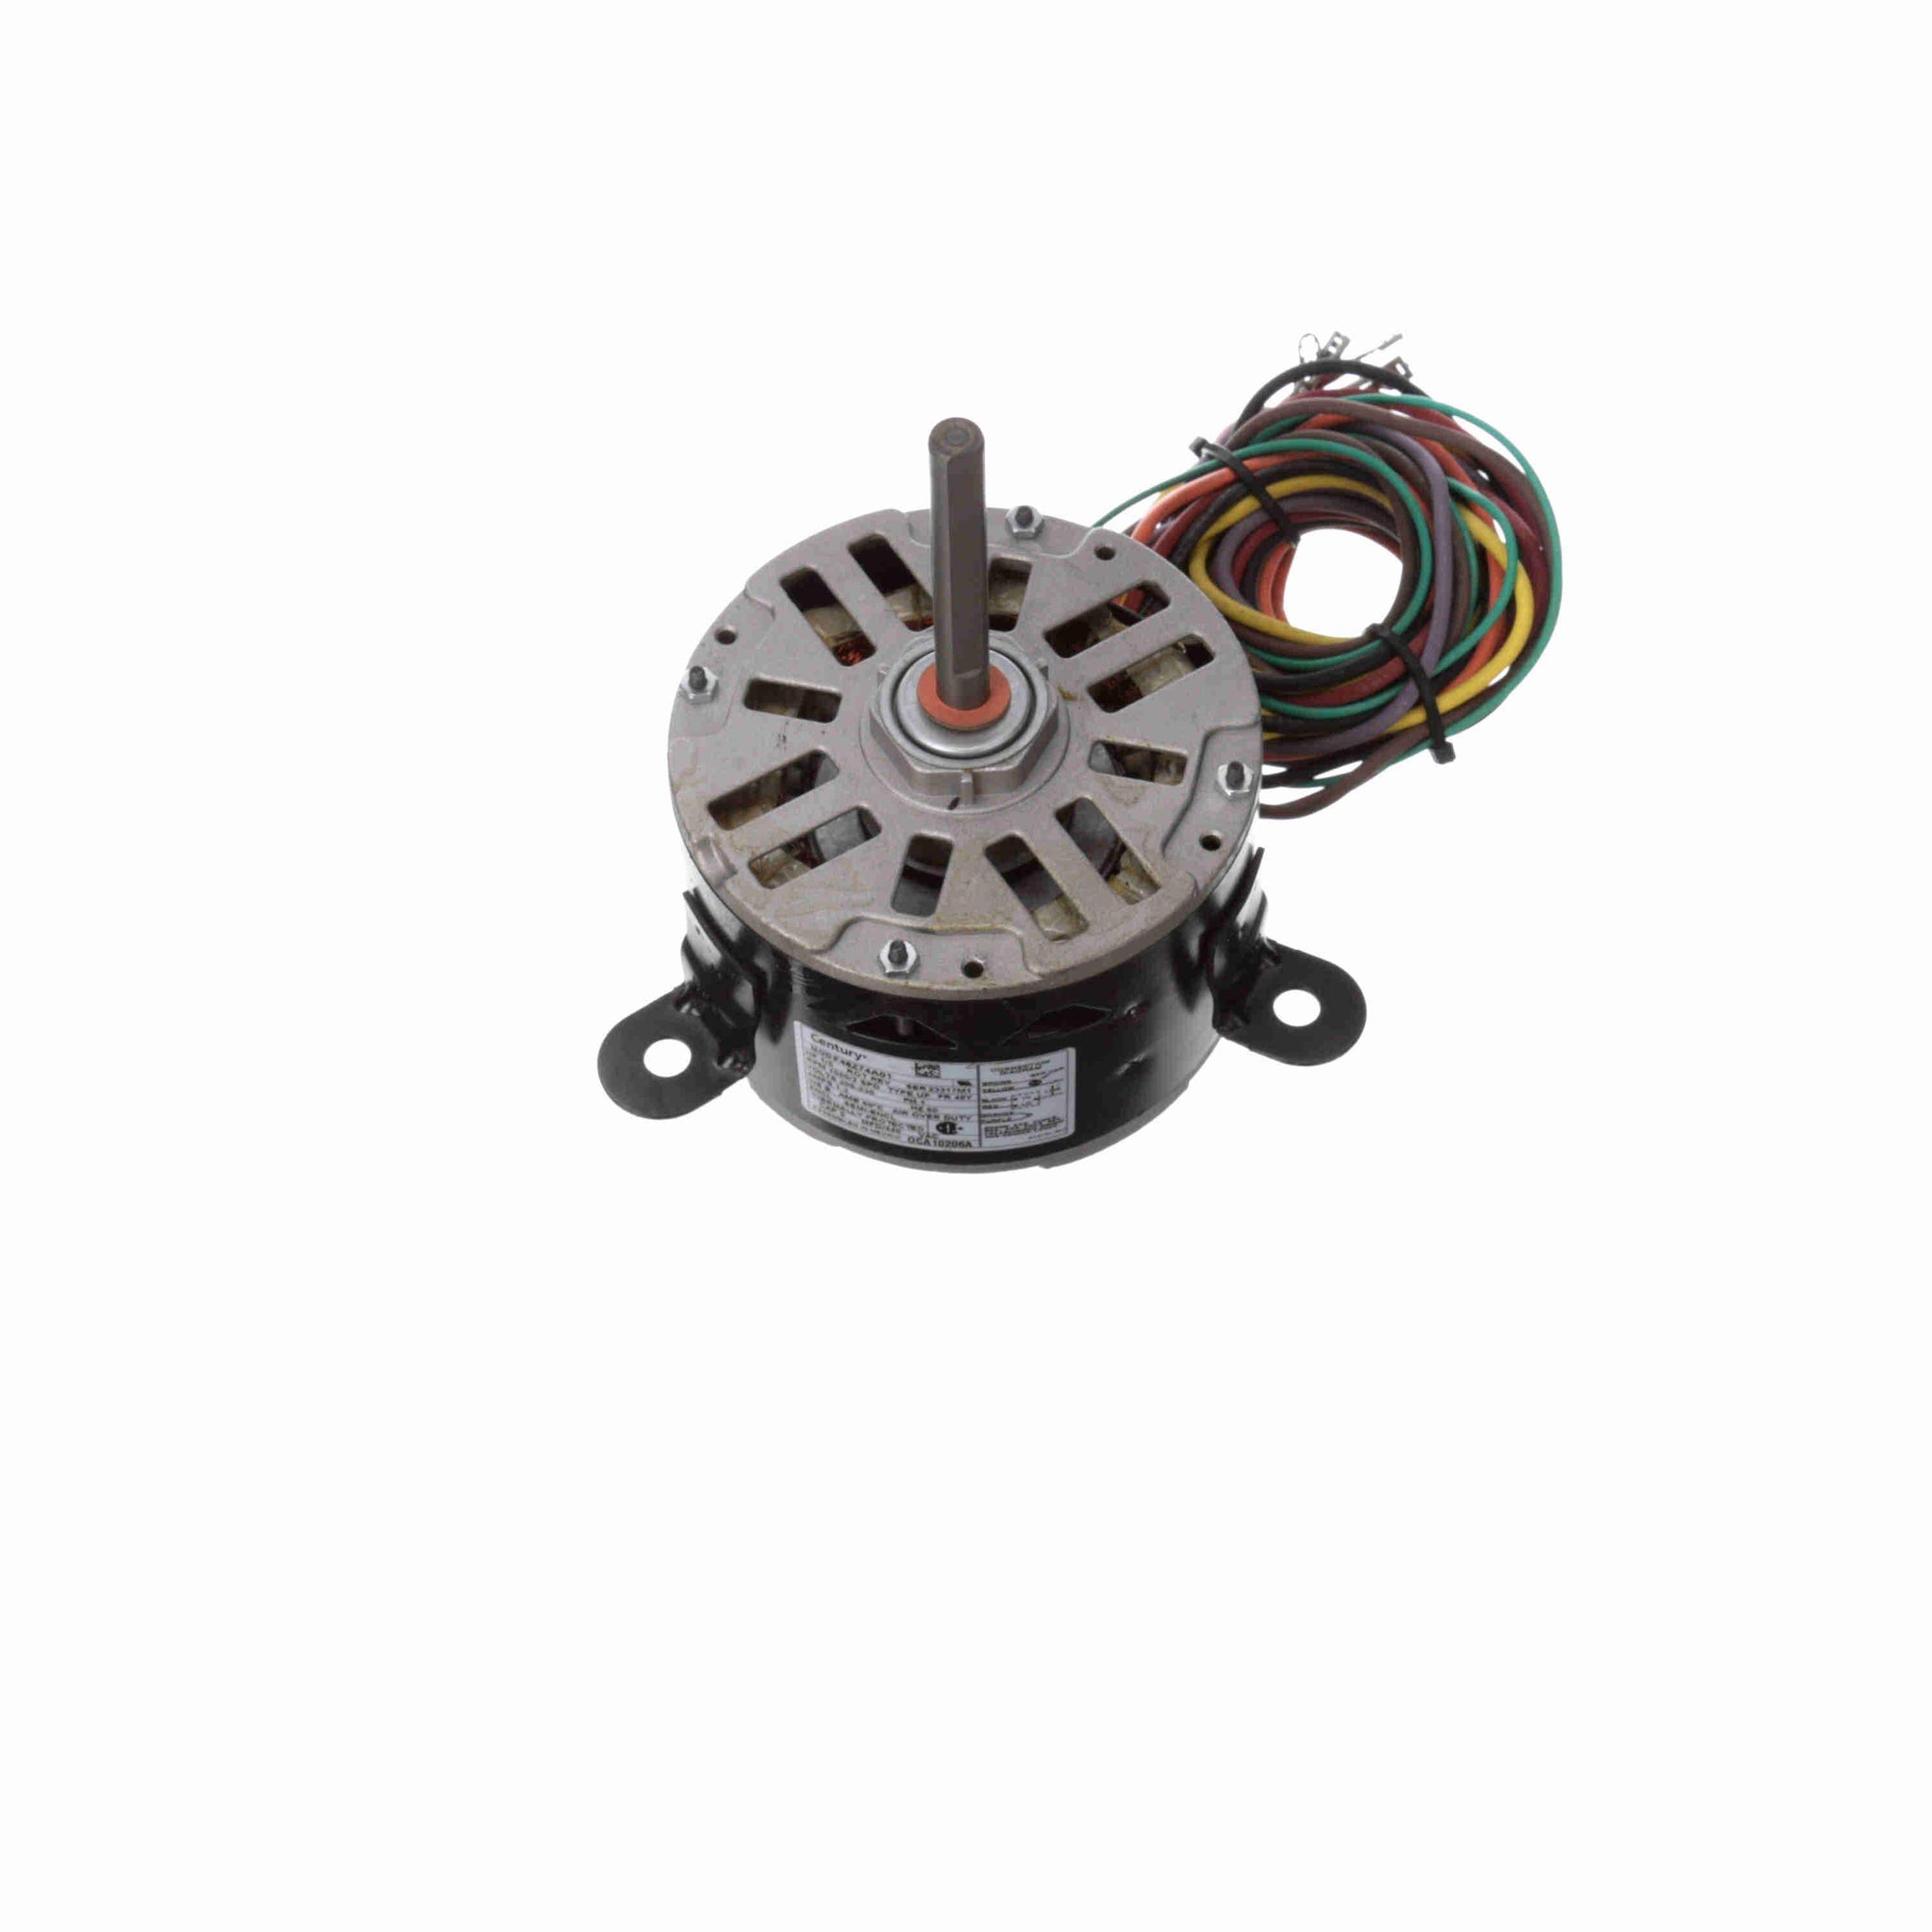 OCA10206A - 1/5 HP OEM Replacement Motor, 1050 RPM, 2 Speed, 208-230 Volts, 48 Frame, Semi Enclosed - Hardware & Moreee